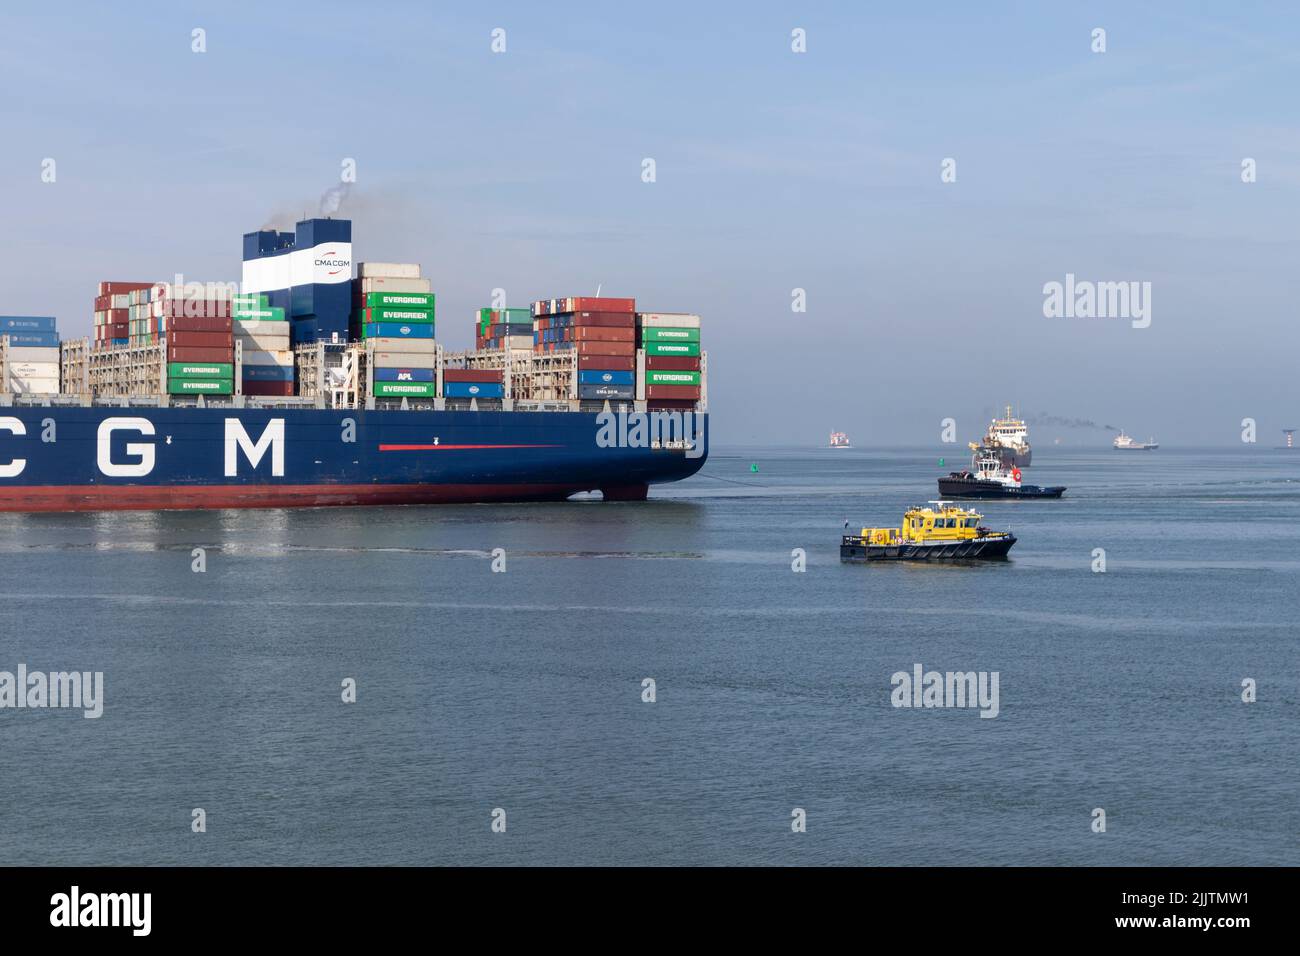 A closeup shot of the CMA CGM Zheng He containership in Rotterdam, Netherlands Stock Photo